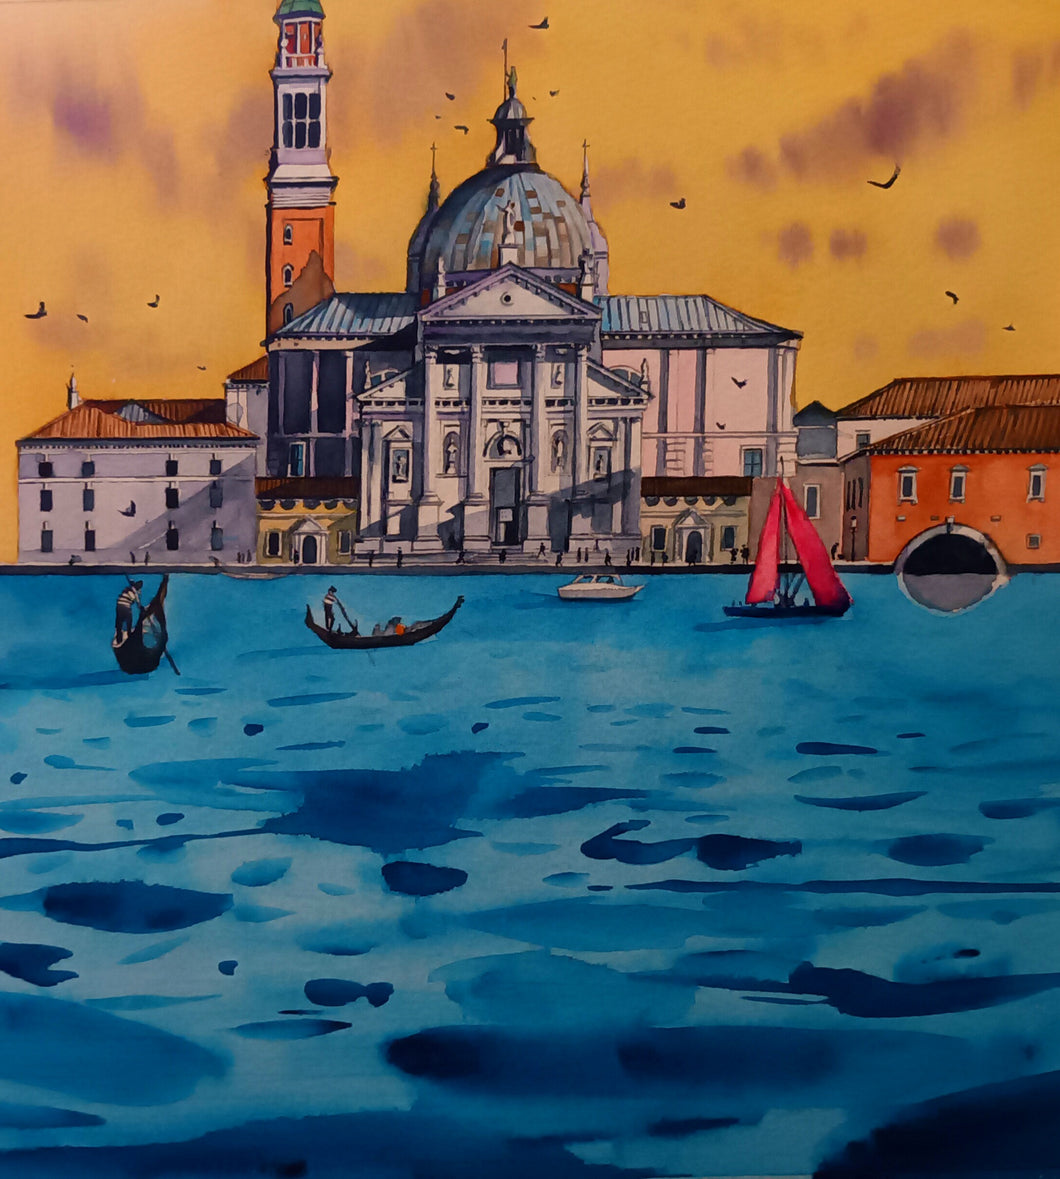 Watercolour paintings of San Giorgio Maggiore, Venice Italy, by Cathal O'Briain